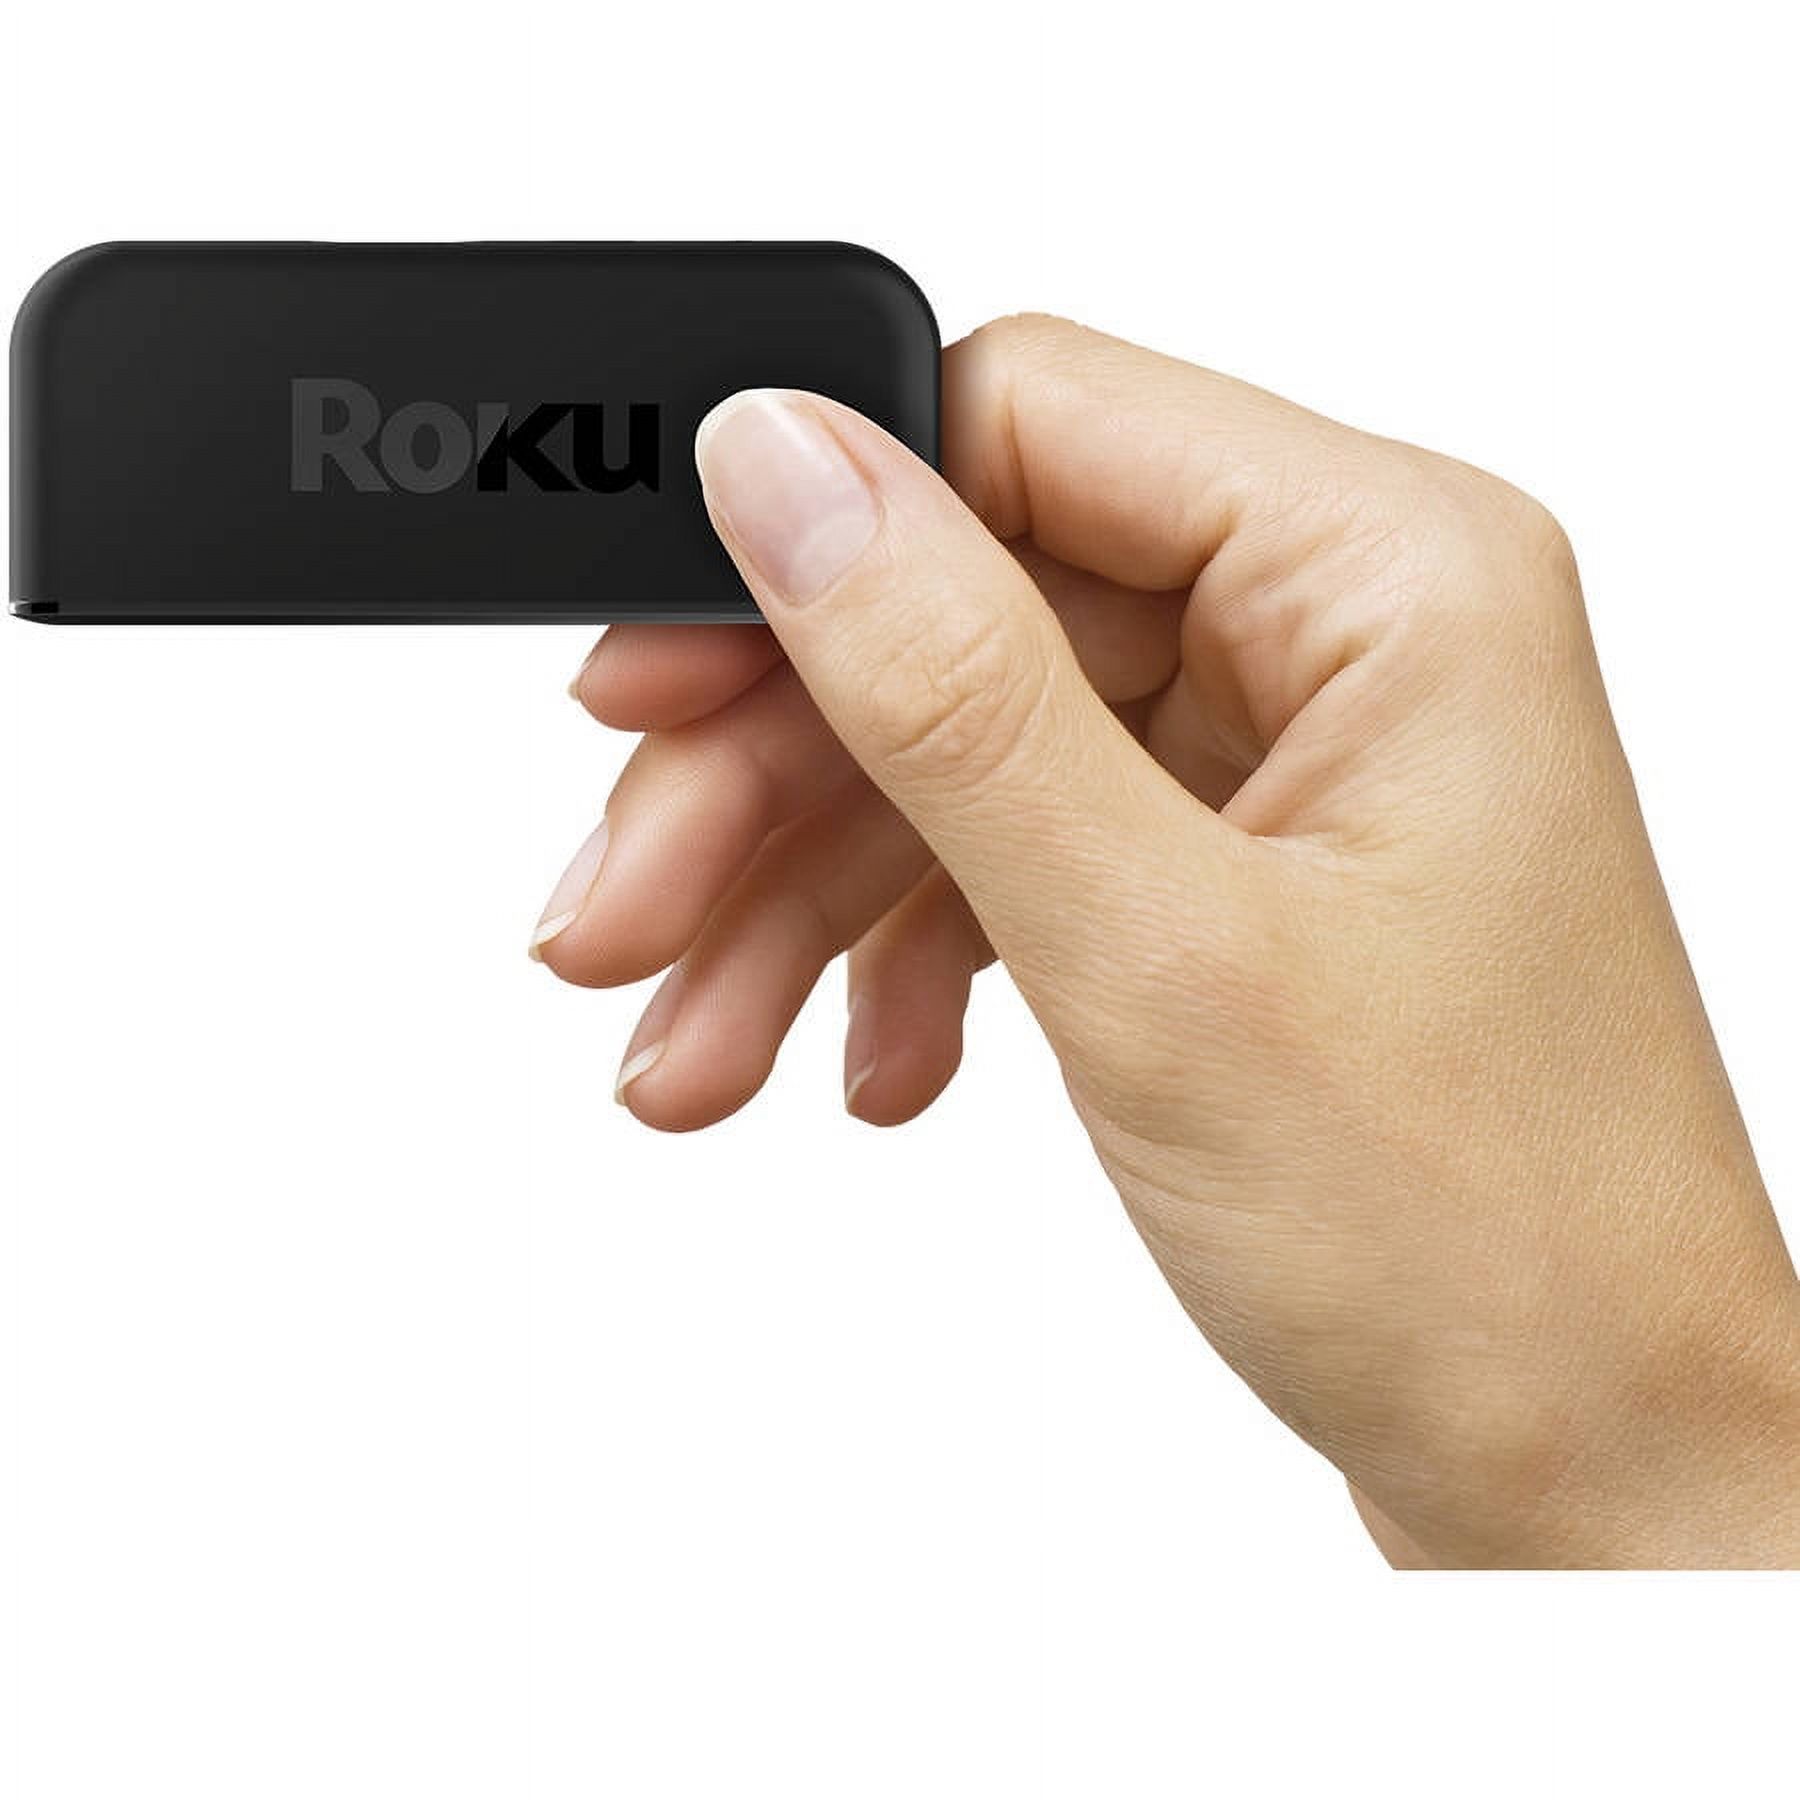 Roku Express+ Streaming Media Players (2016 Model) - image 5 of 9